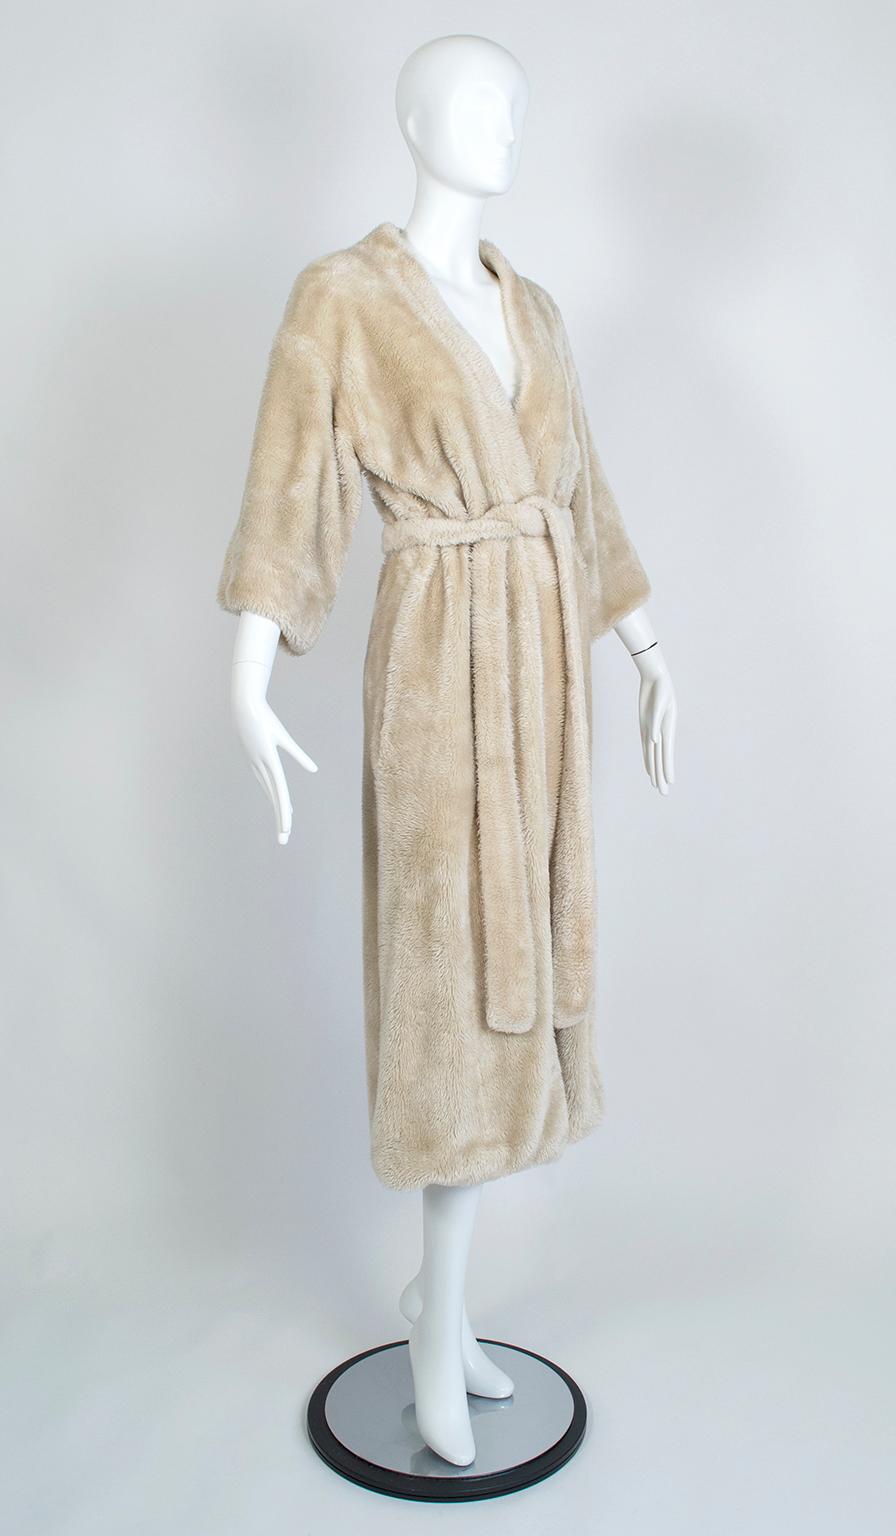 Reversible Ivory Faux Fur Robe w Leonard Paris-Inspired Jungle Lining - M, 1960s In Good Condition For Sale In Tucson, AZ